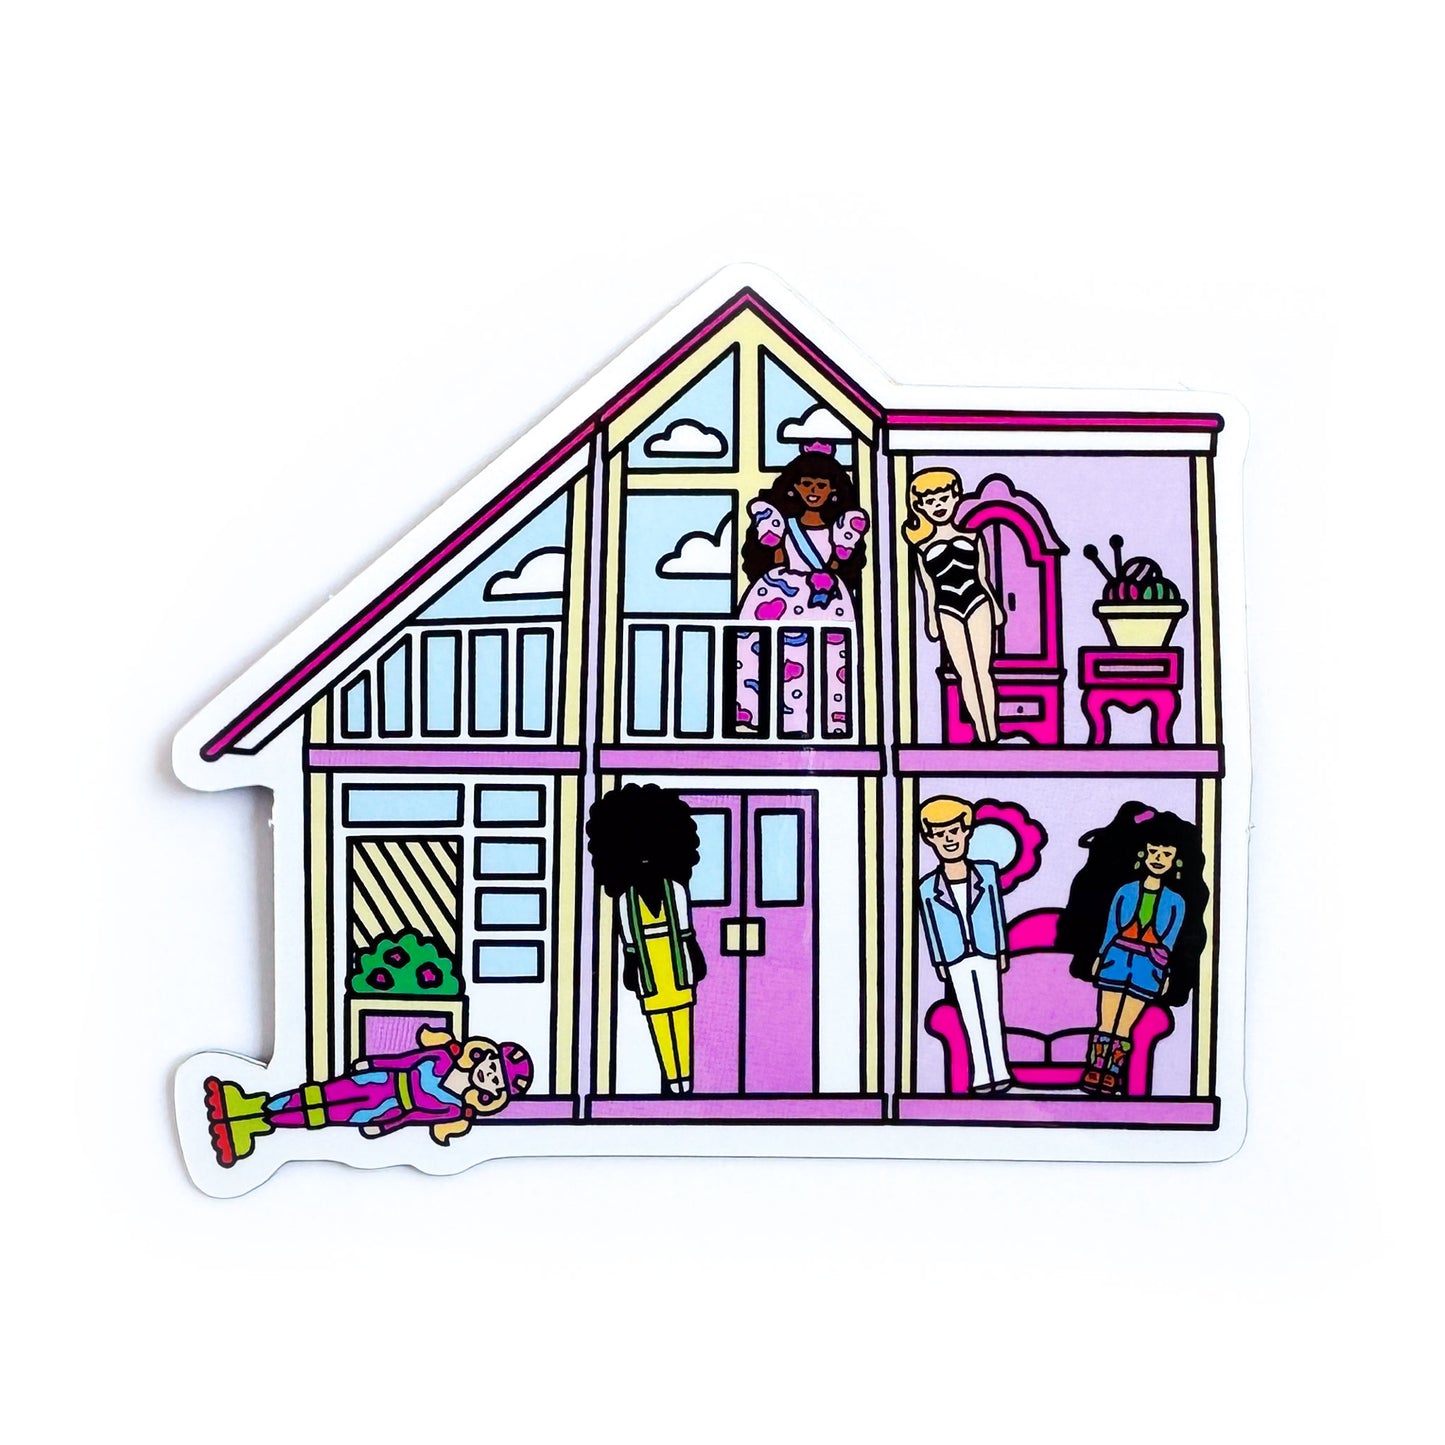 A sticker shaped like a Barbie DreamHouse in pinks and creams. There are various Barbie toys strewn about the house including the original bathing suit barbie, ken, birthday barbie, rollerblade barbie and more. 